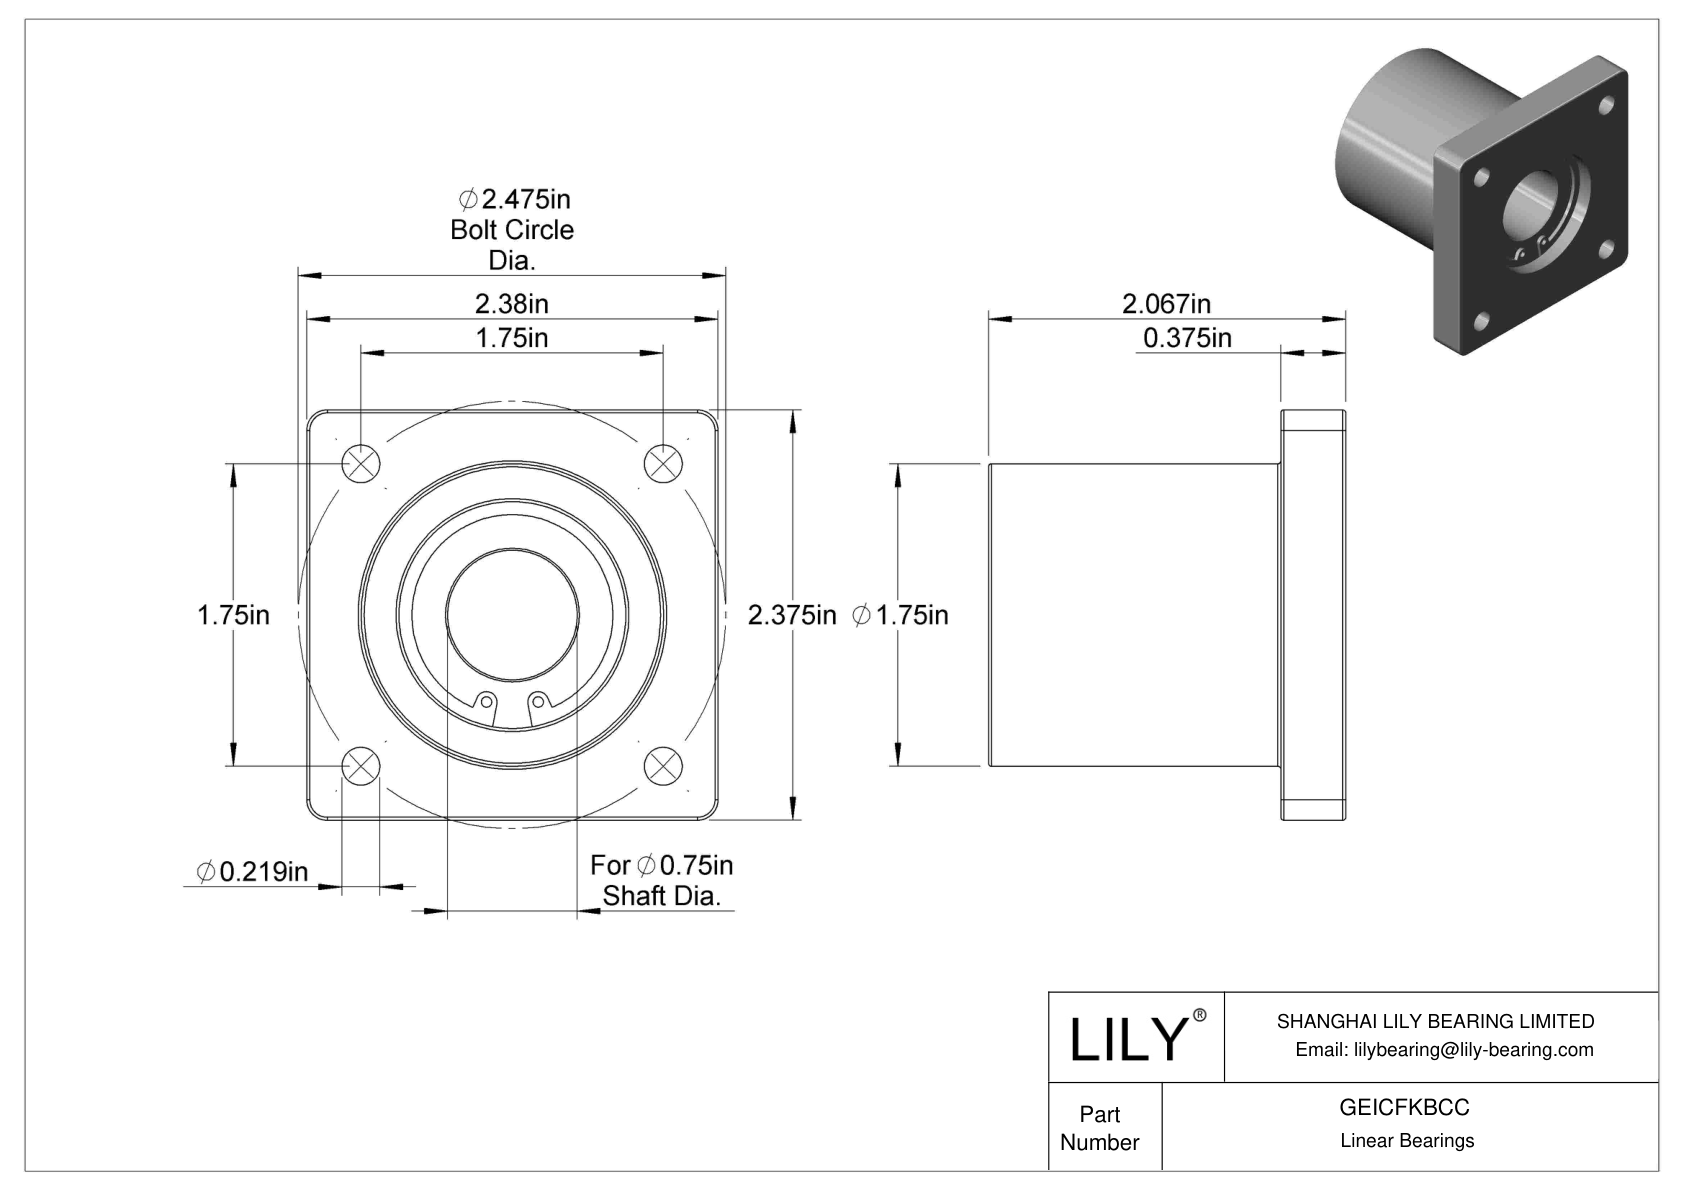 GEICFKBCC Chemical-Resistant Flange-Mounted Linear Sleeve Bearings cad drawing